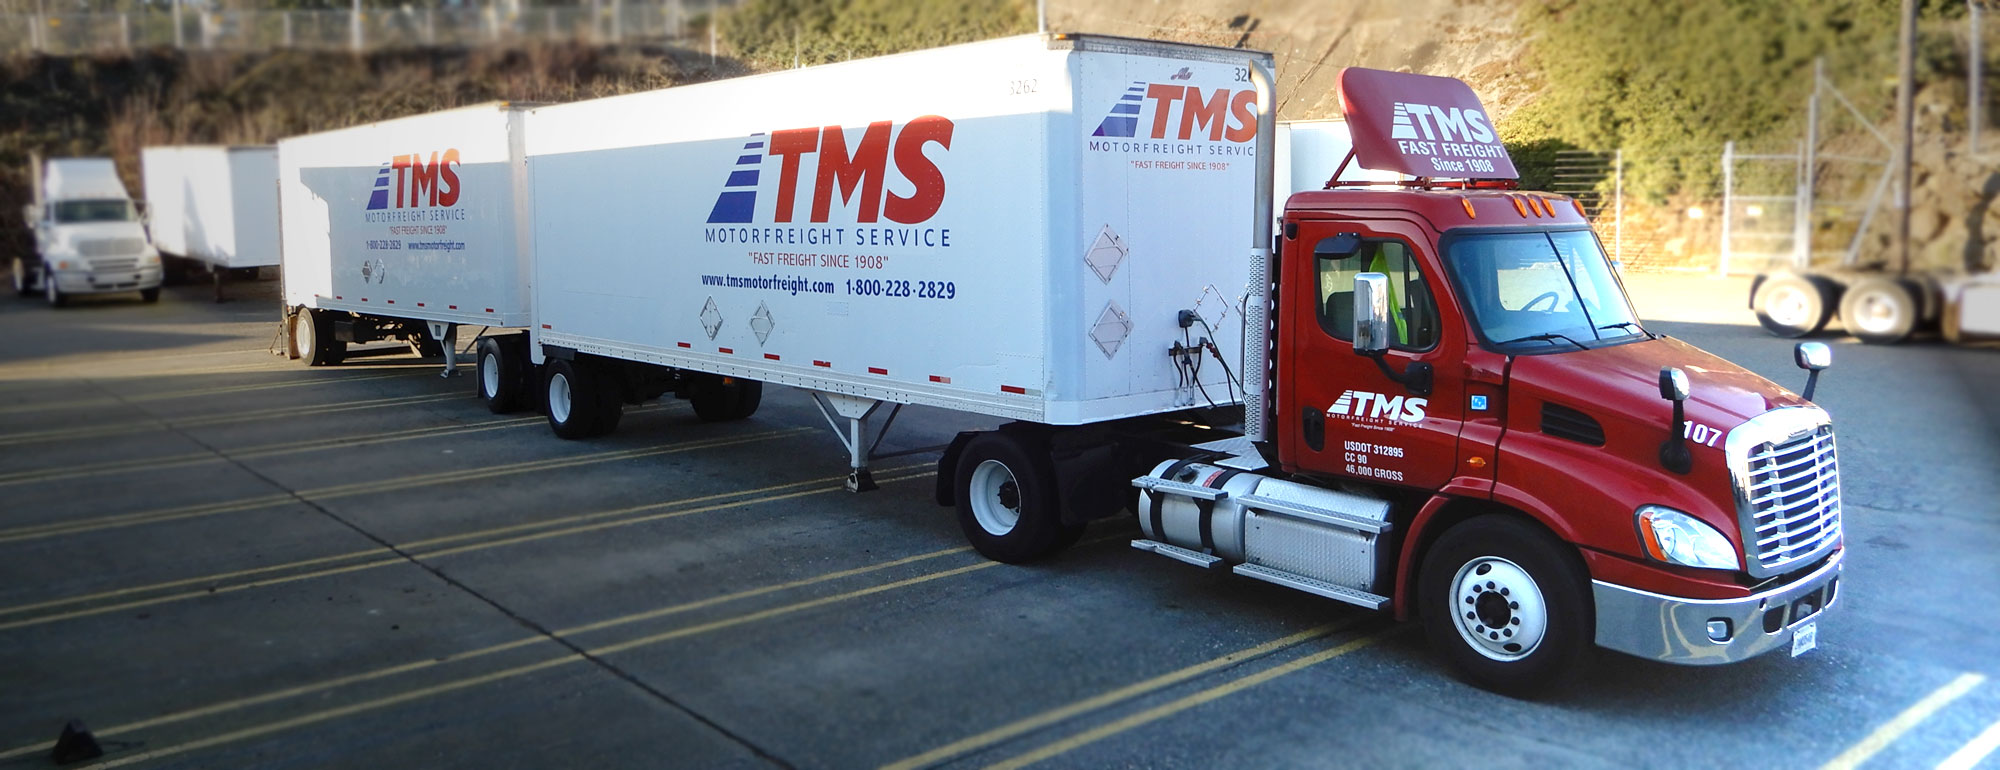 Red TMS semi tractor hooked up to two transport van trailers in a parking lot